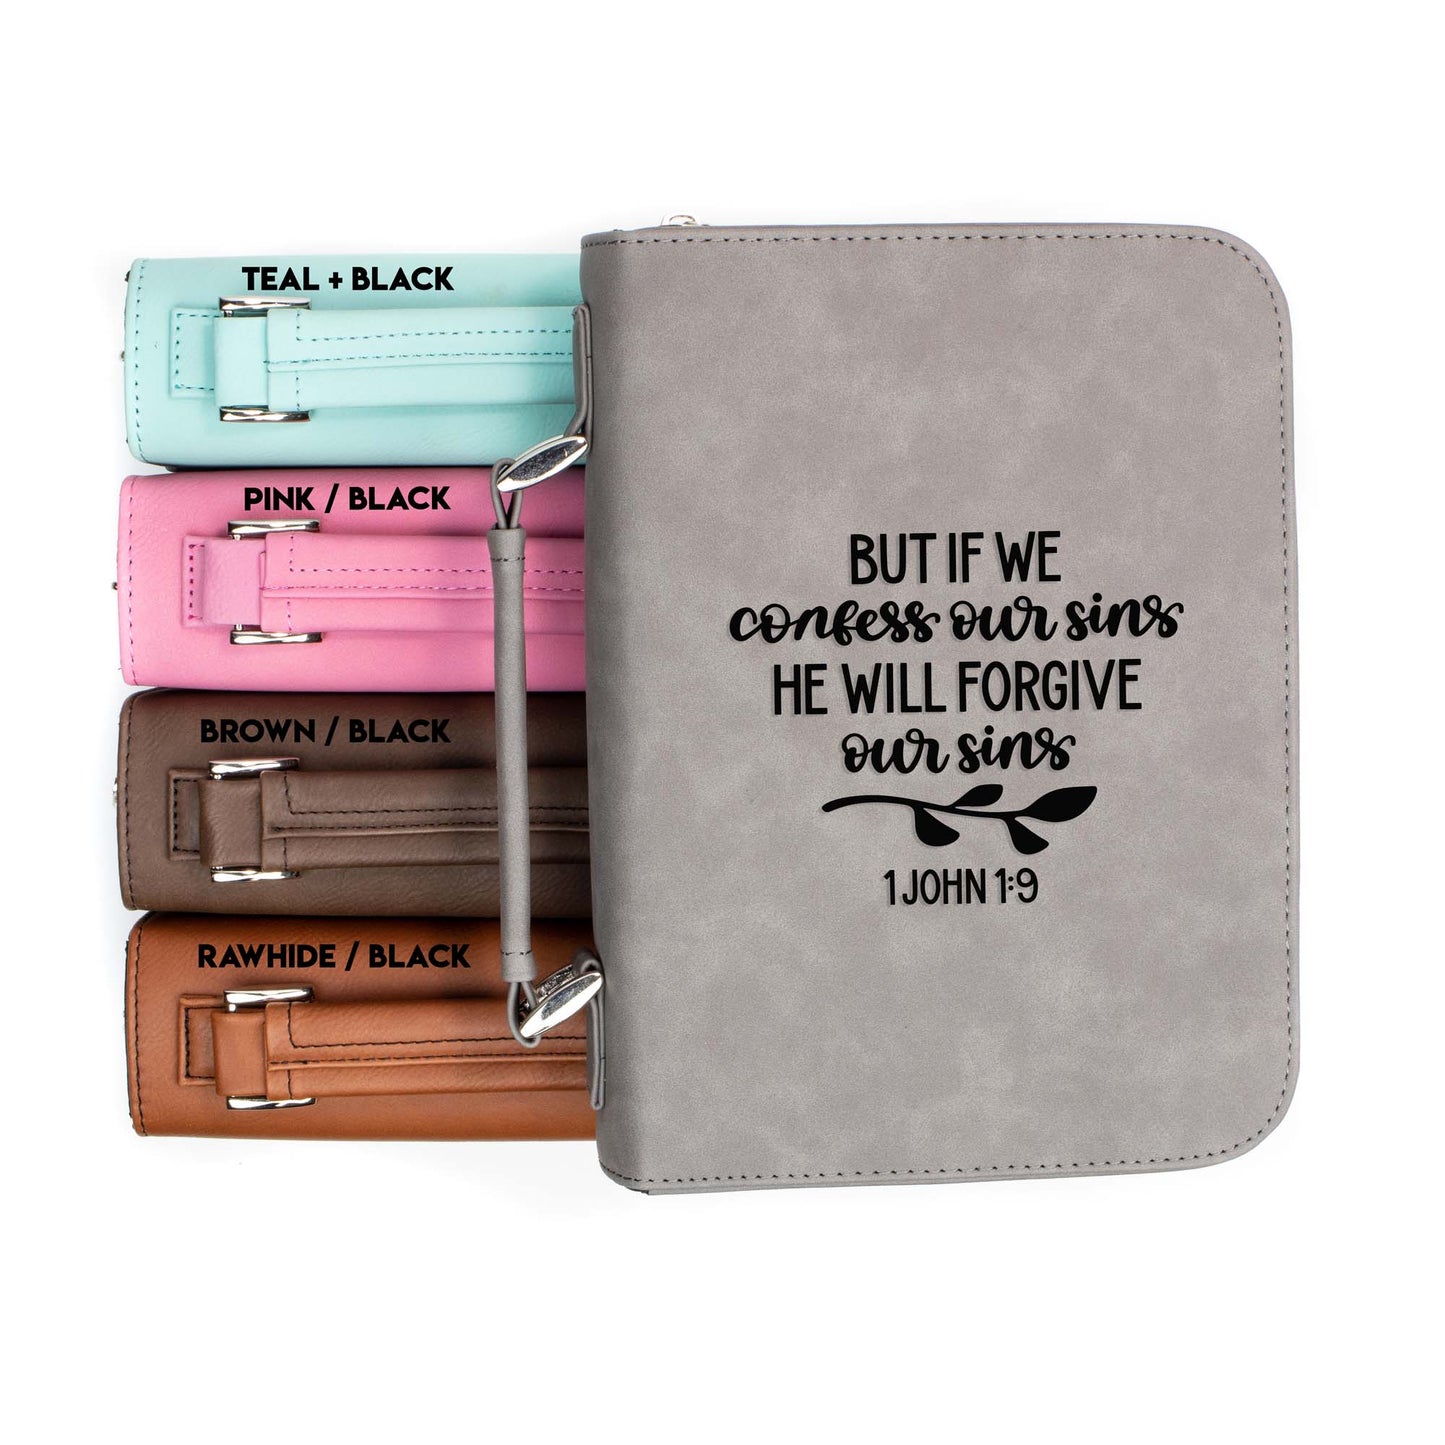 If We Confess Our Sins 1 John 1-9 Bible Cover | Faux Leather With Handle + Pockets